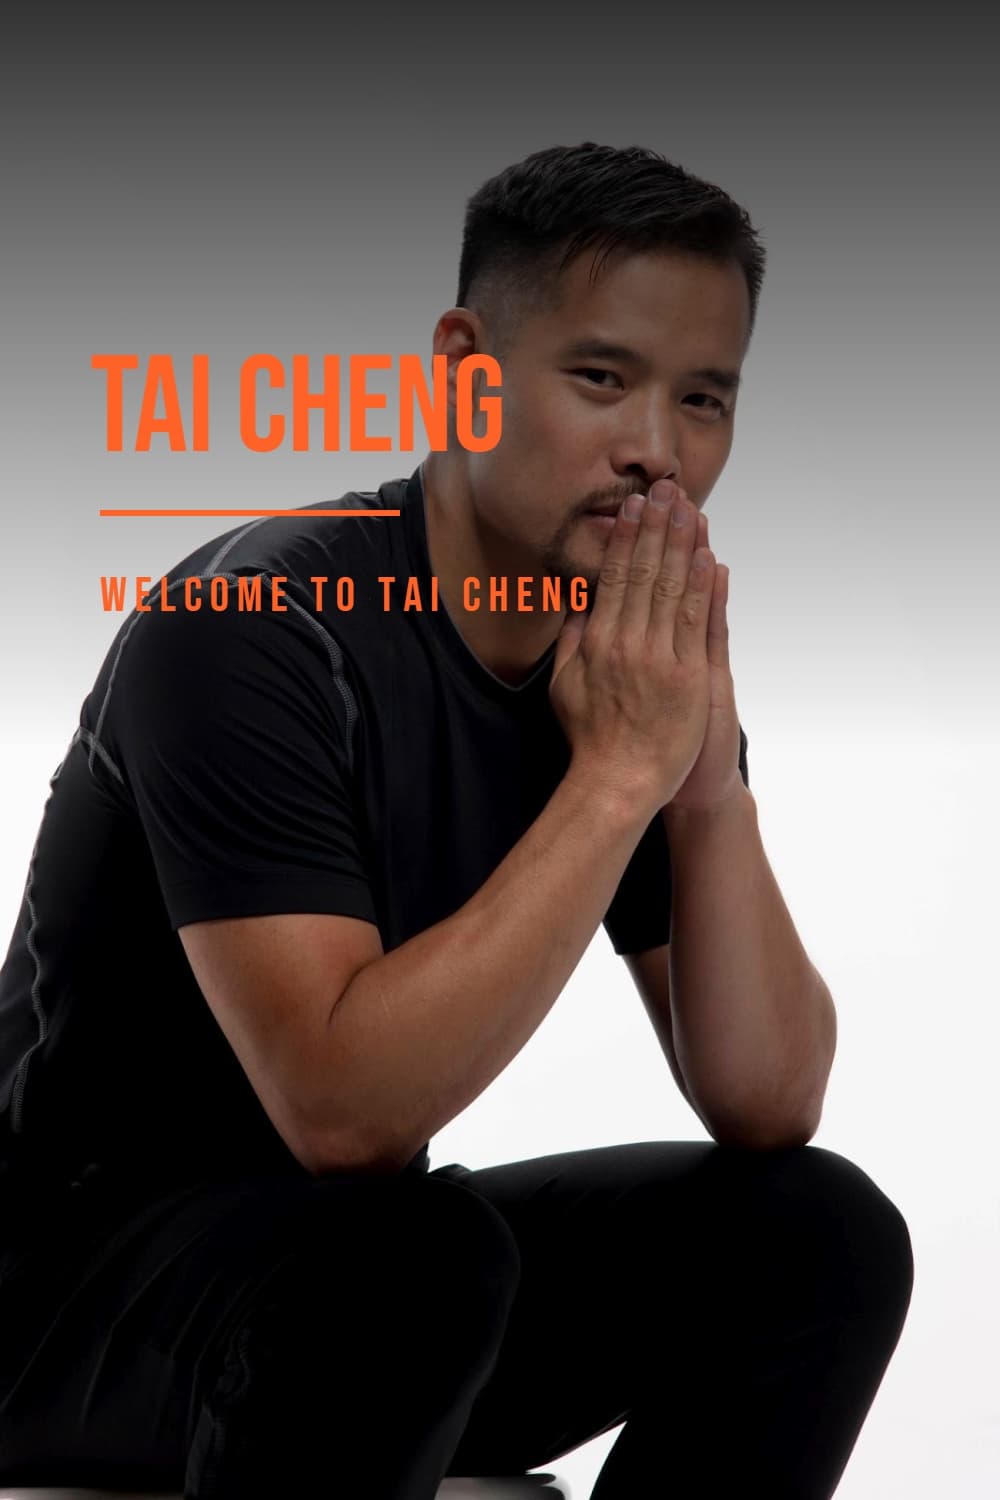 Welcome to Tai Cheng